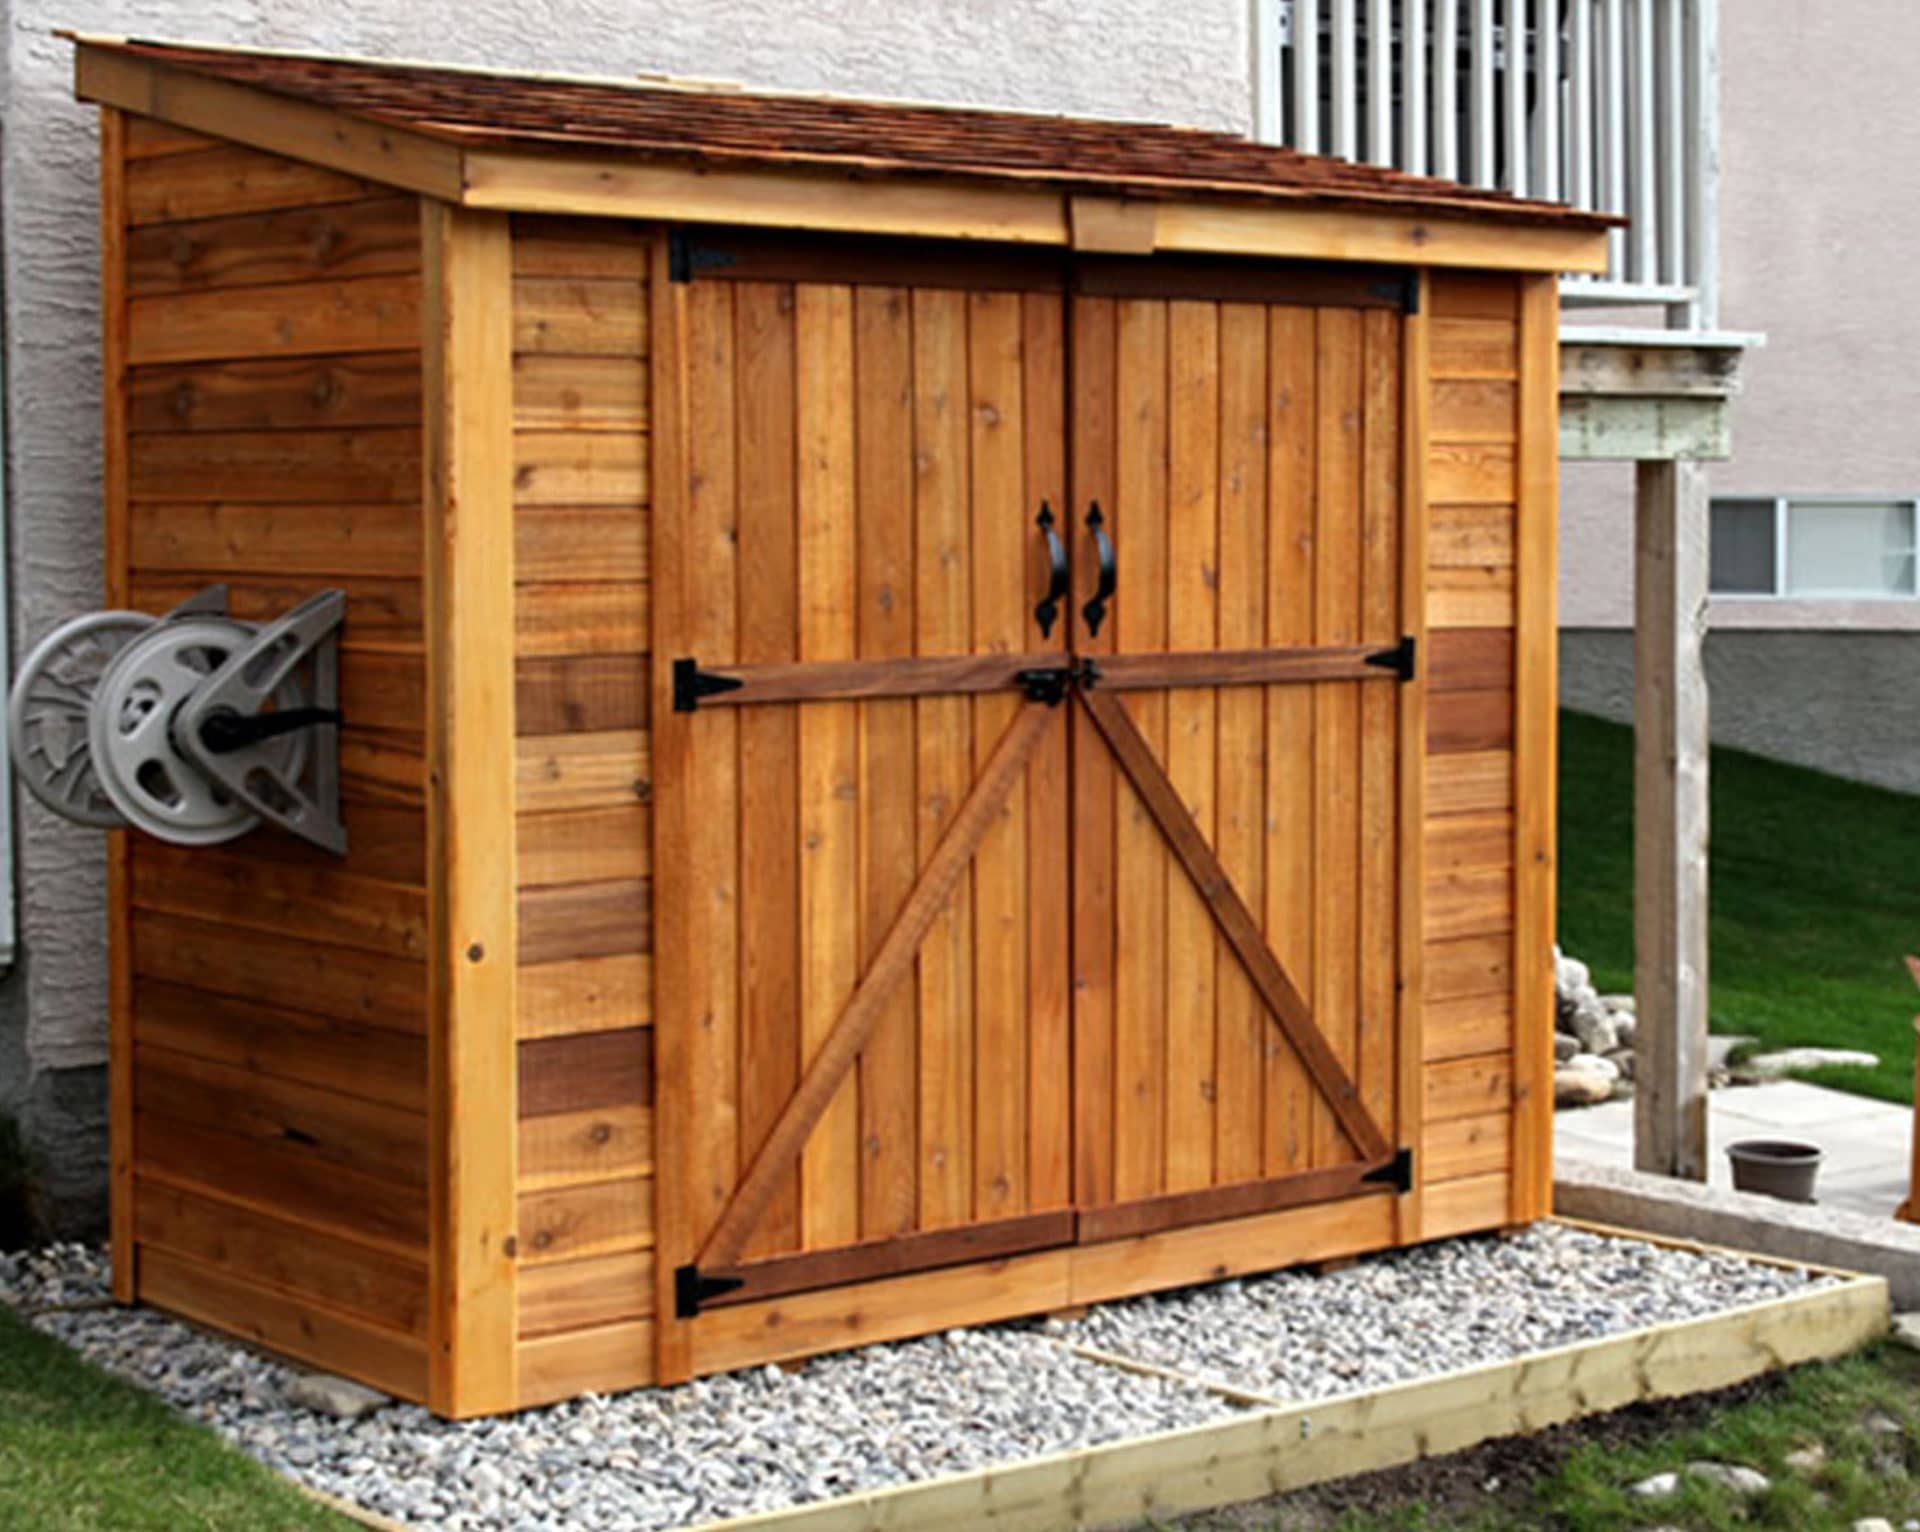 Lean to shed doors